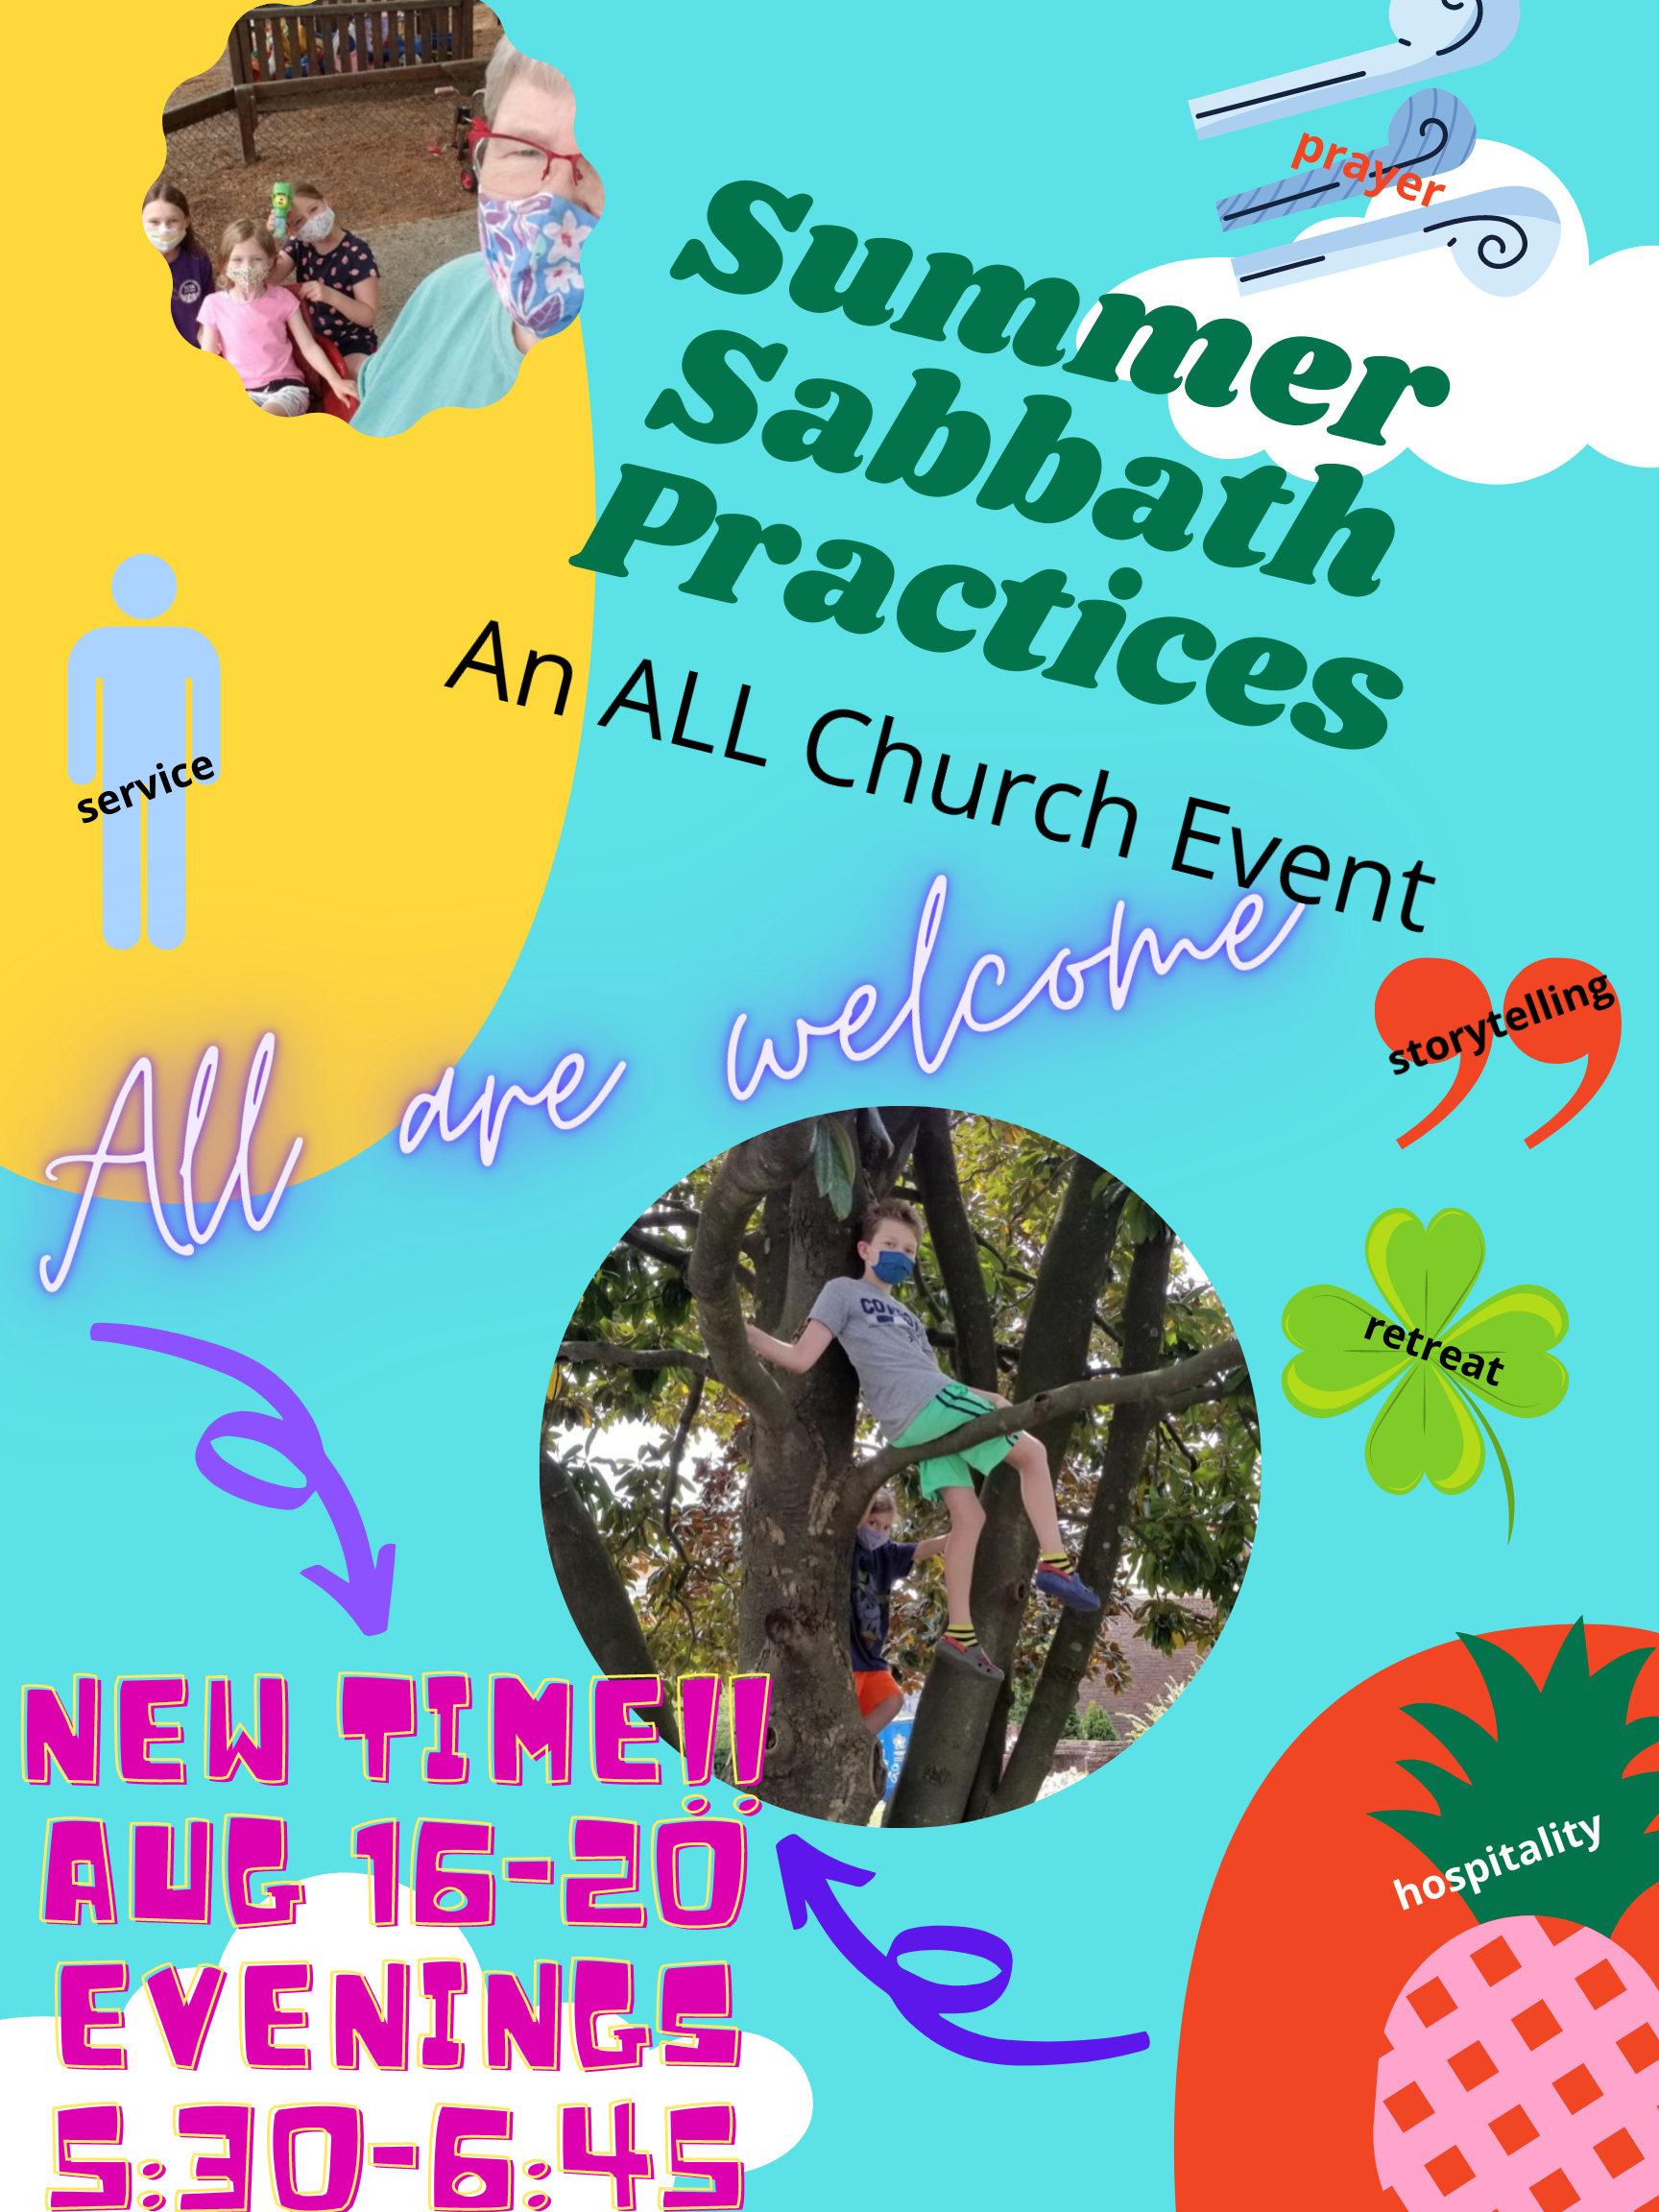 “Summer Sabbath Practices” all-church event has been canceled.